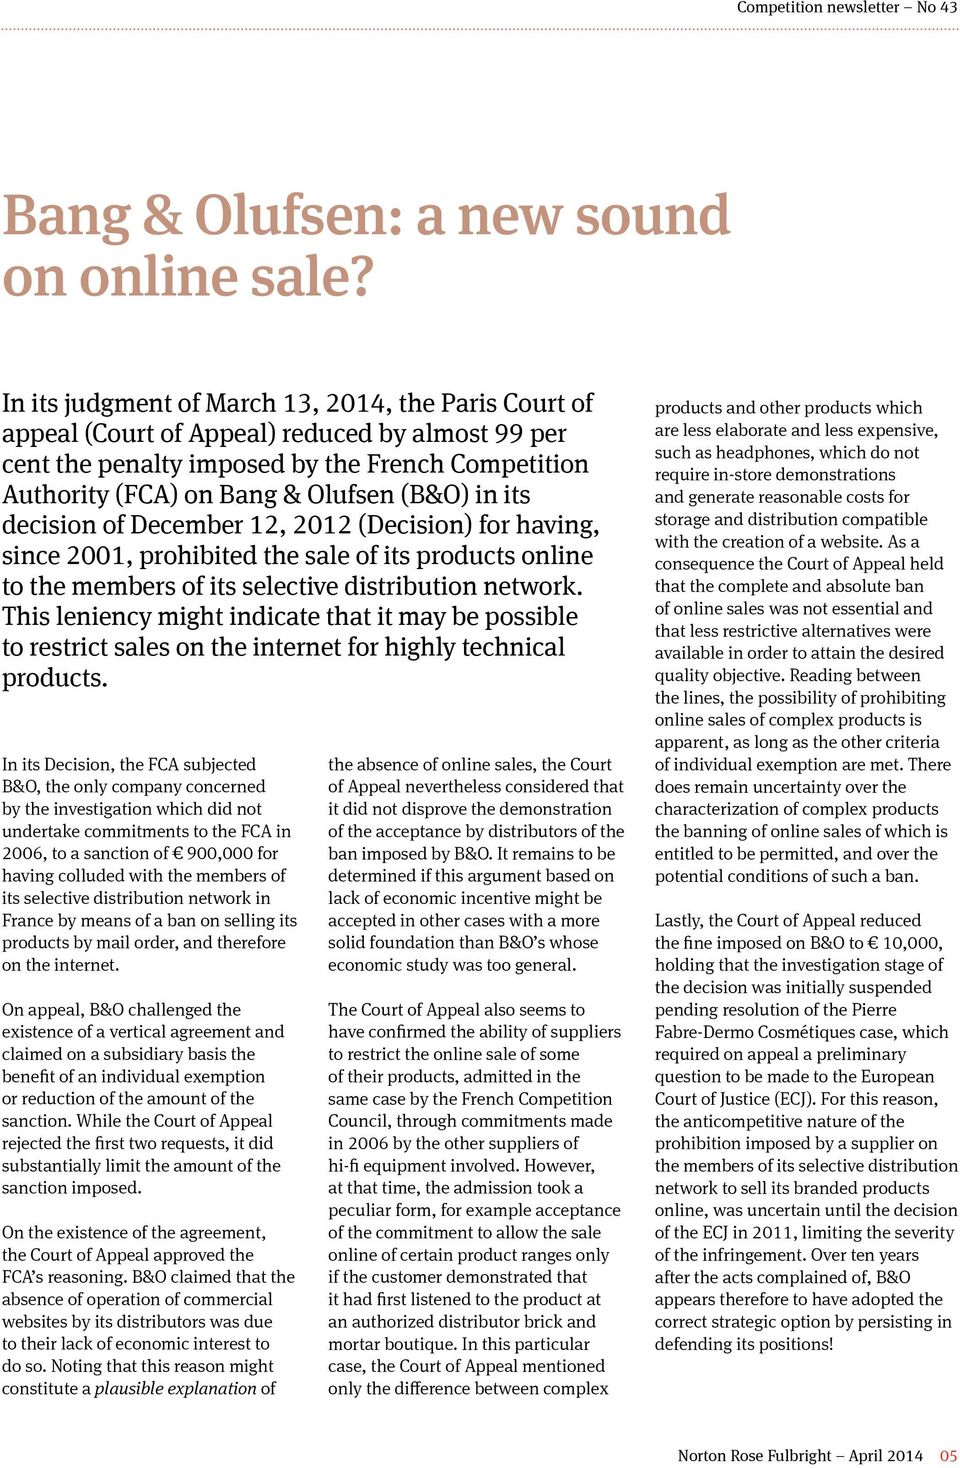 its decision of December 12, 2012 (Decision) for having, since 2001, prohibited the sale of its products online to the members of its selective distribution network.